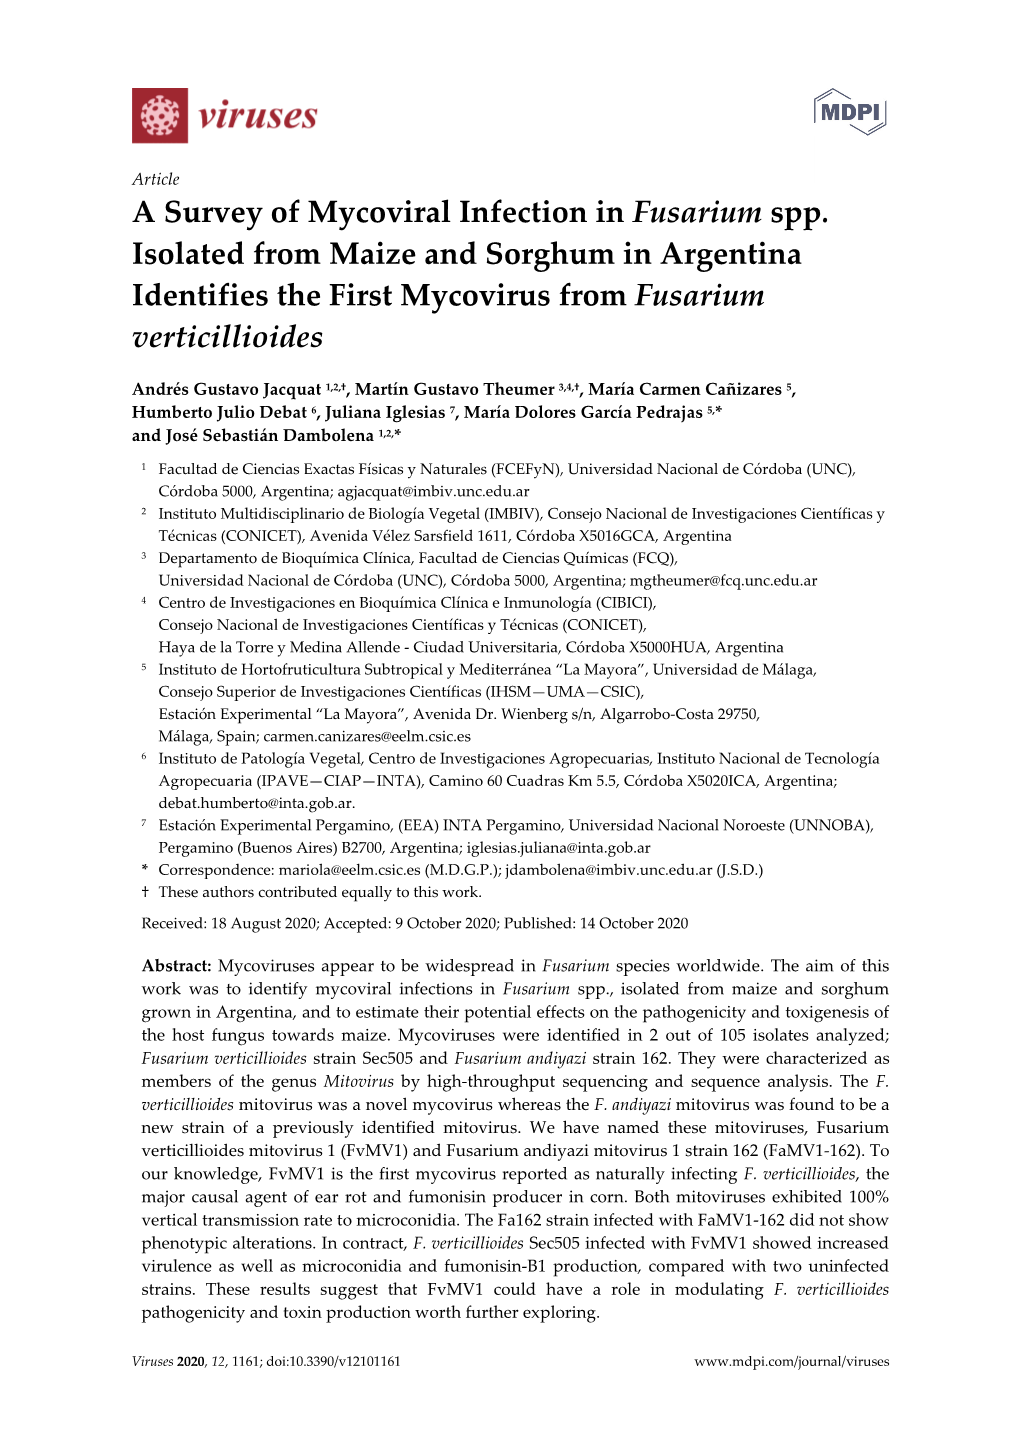 A Survey of Mycoviral Infection in Fusarium Spp. Isolated from Maize and Sorghum in Argentina Identifies the First Mycovirus from Fusarium Verticillioides